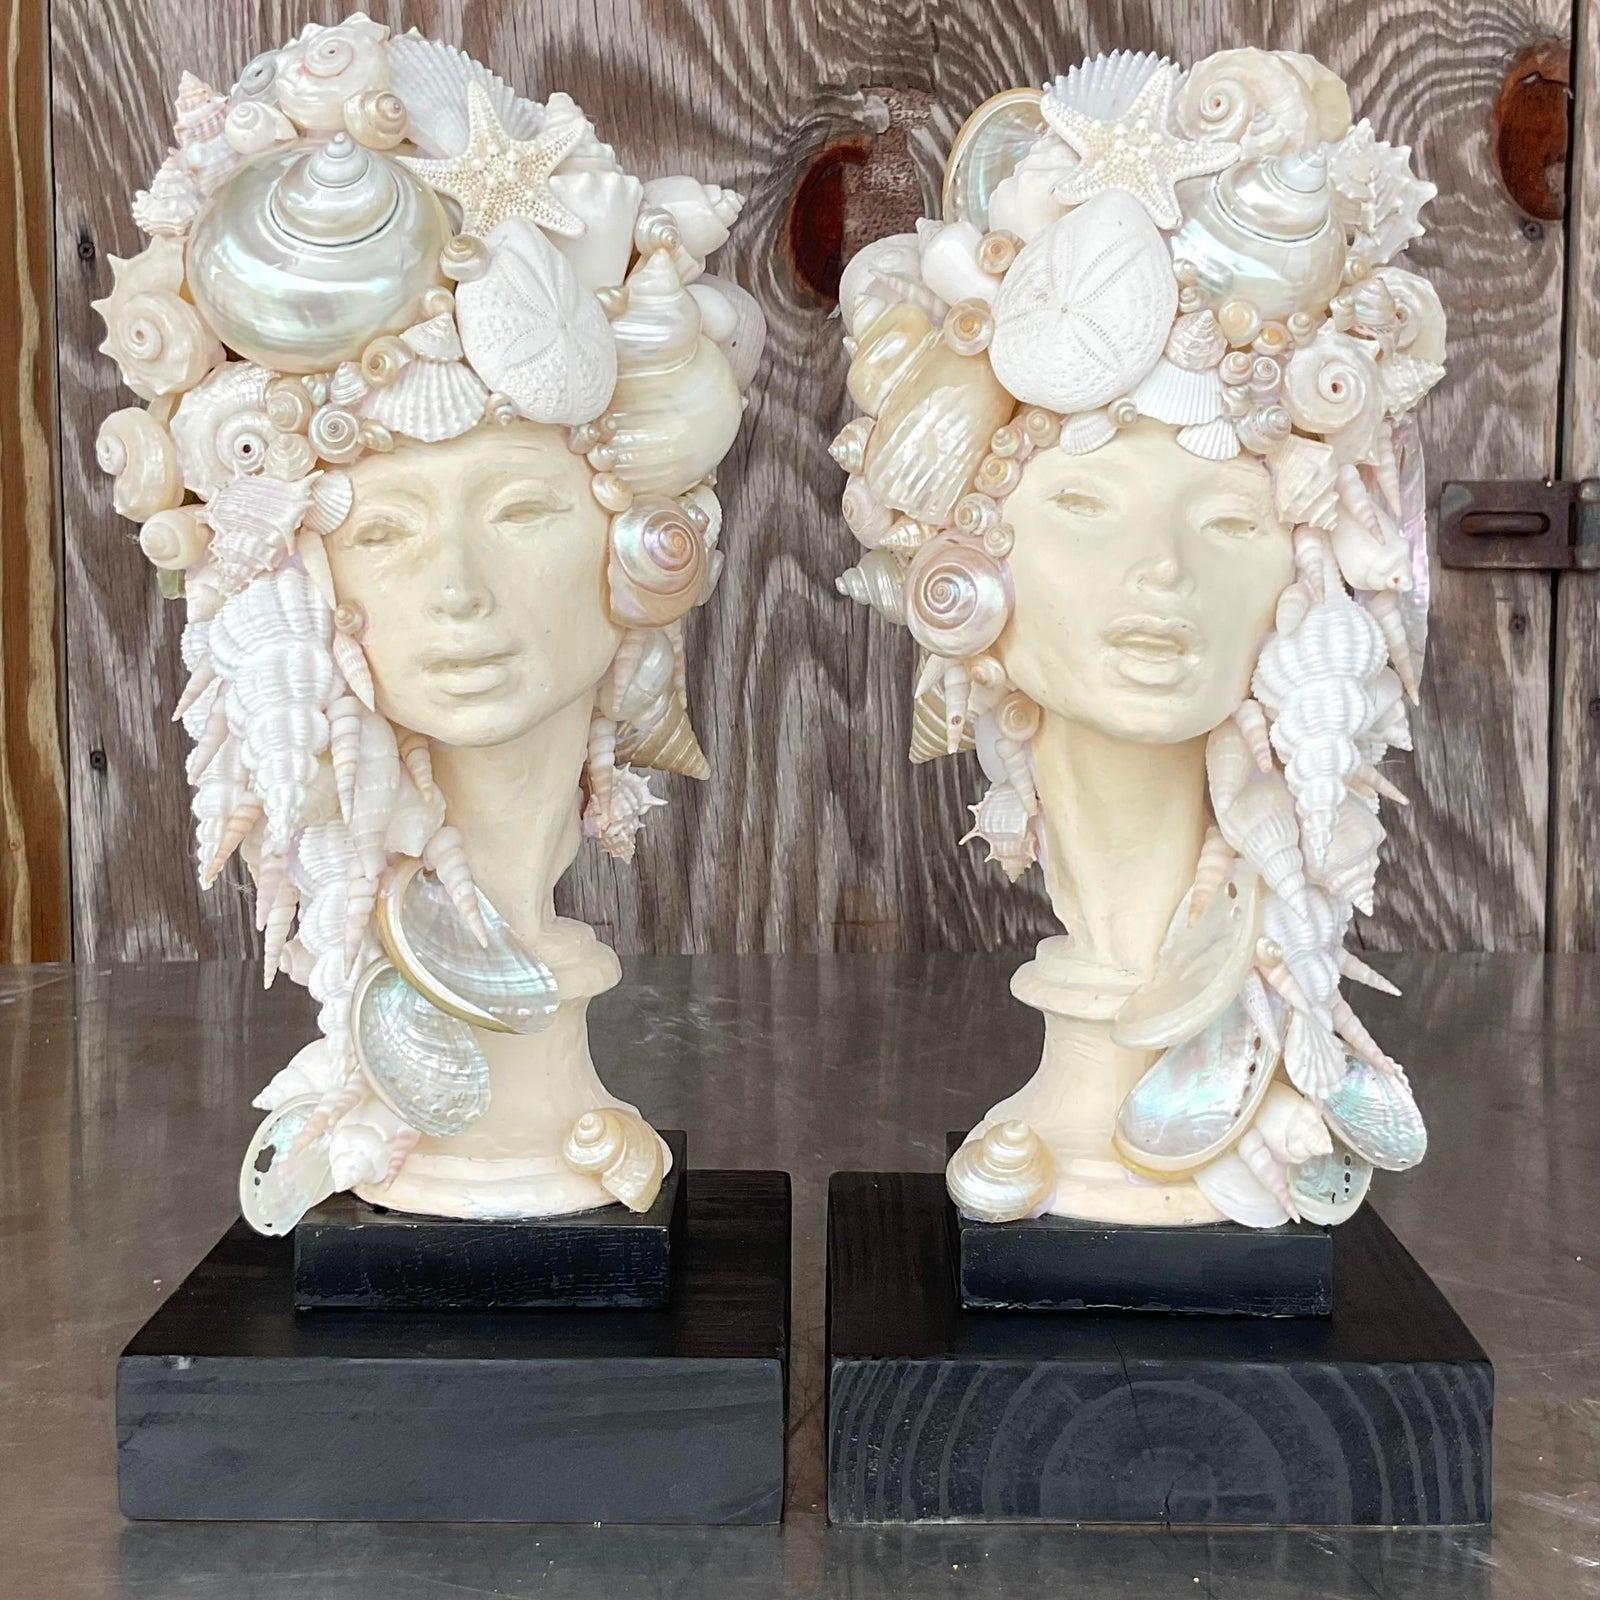 A fabulous pair of vintage Coastal busts. Two chic plaster women in stylish poses. Hand placed shells in a sweeping design. Rest on black wooden plinths.